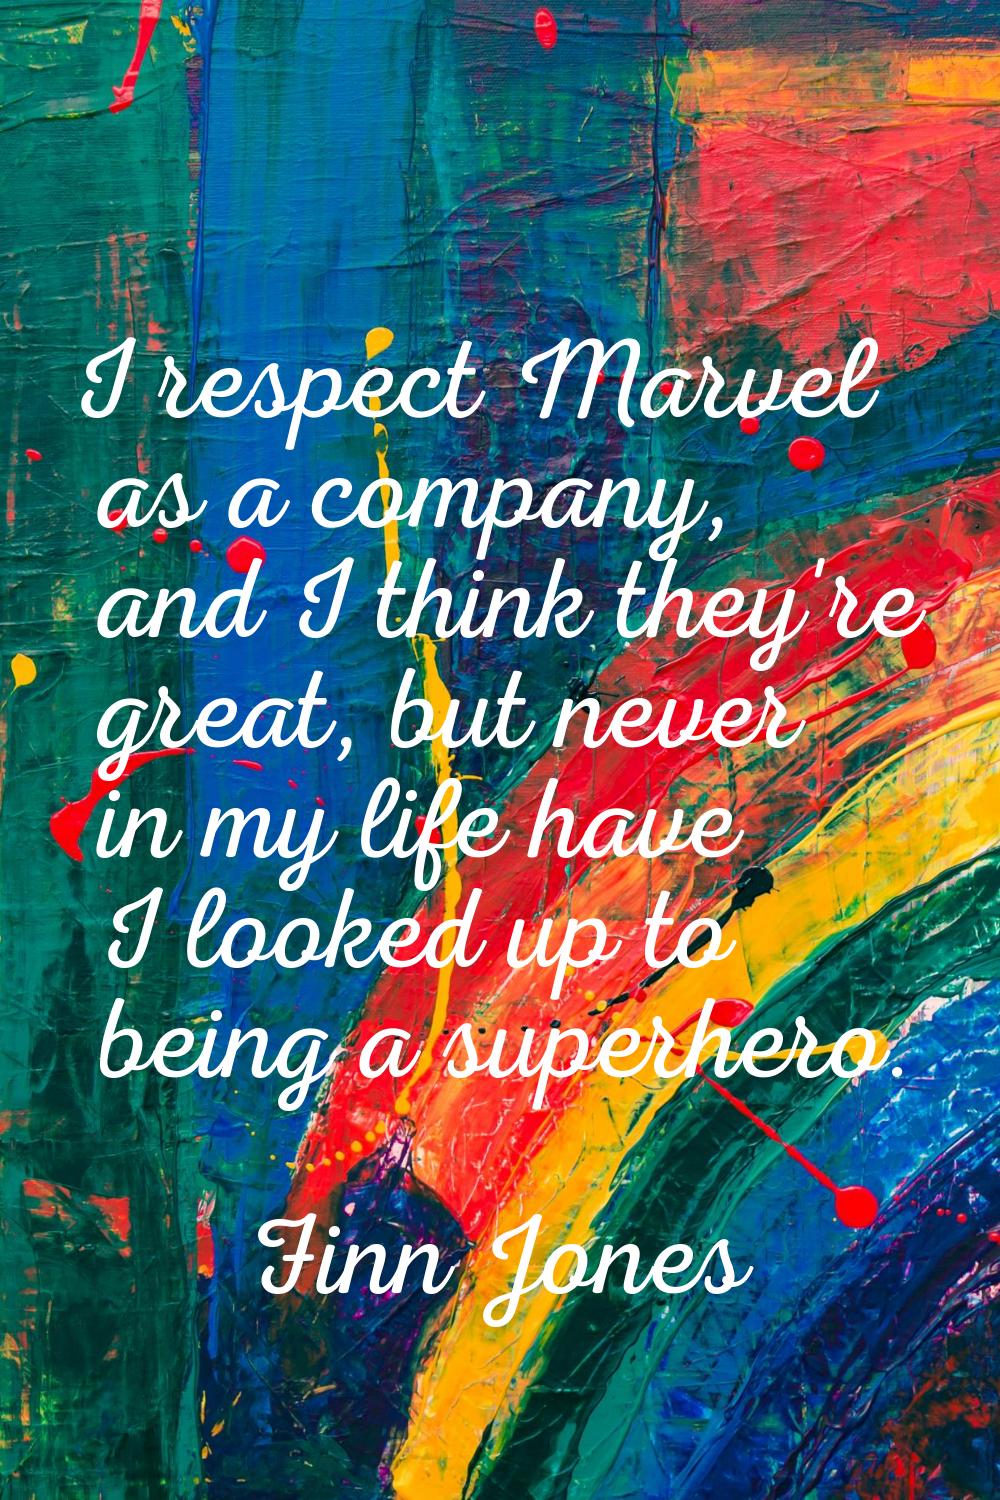 I respect Marvel as a company, and I think they're great, but never in my life have I looked up to 